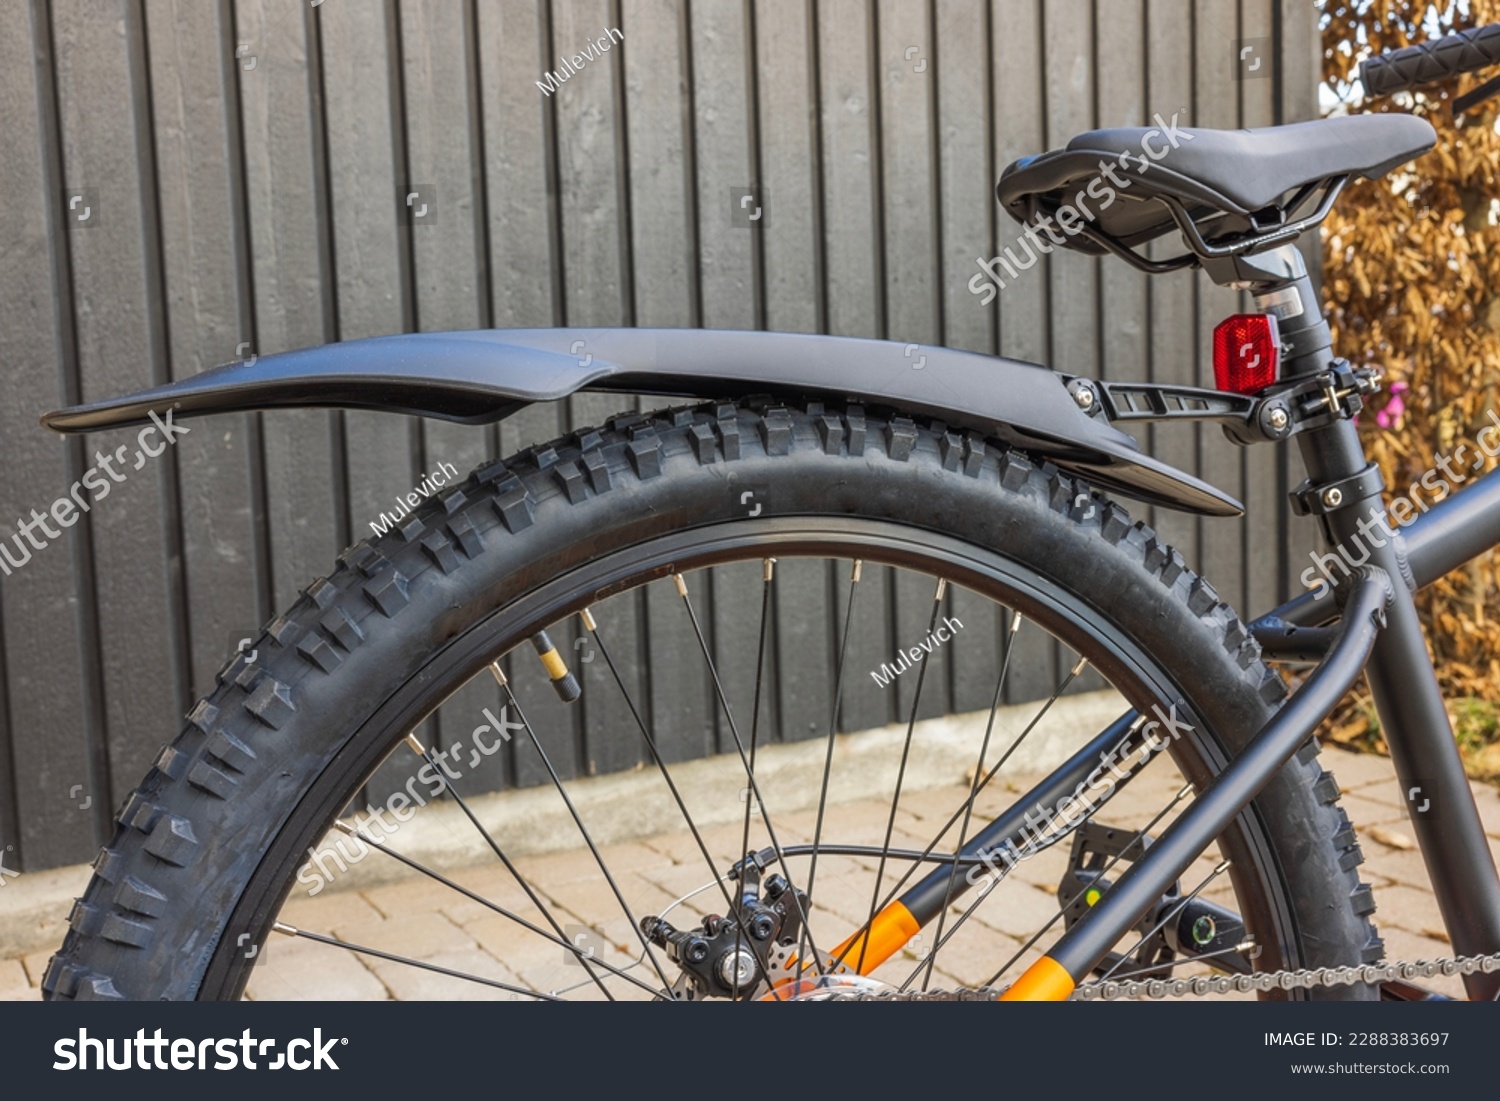 Close-up view of rear wheel of mountain bike with fender. Sweden. #2288383697